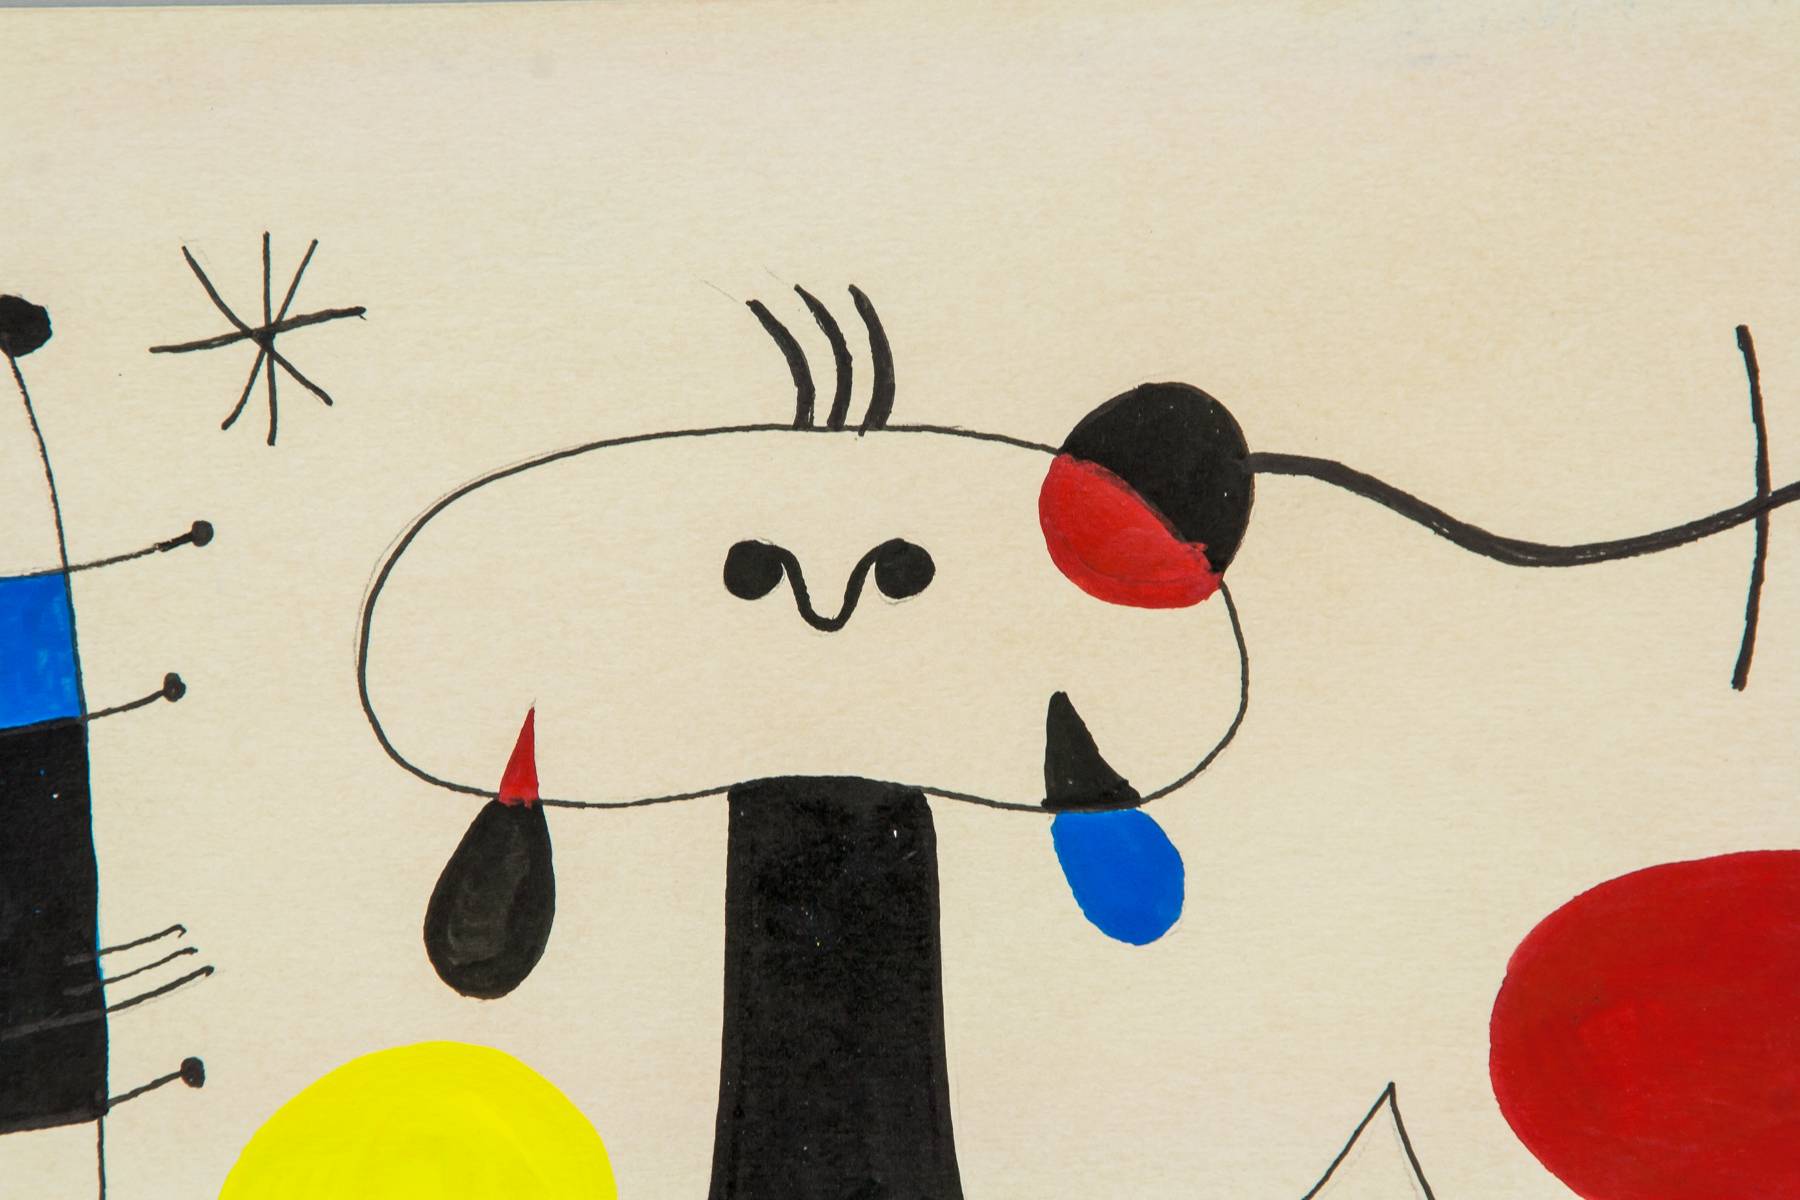 Joan Miro Spanish Surrealist Mixed Media On Paper For Auction At On May